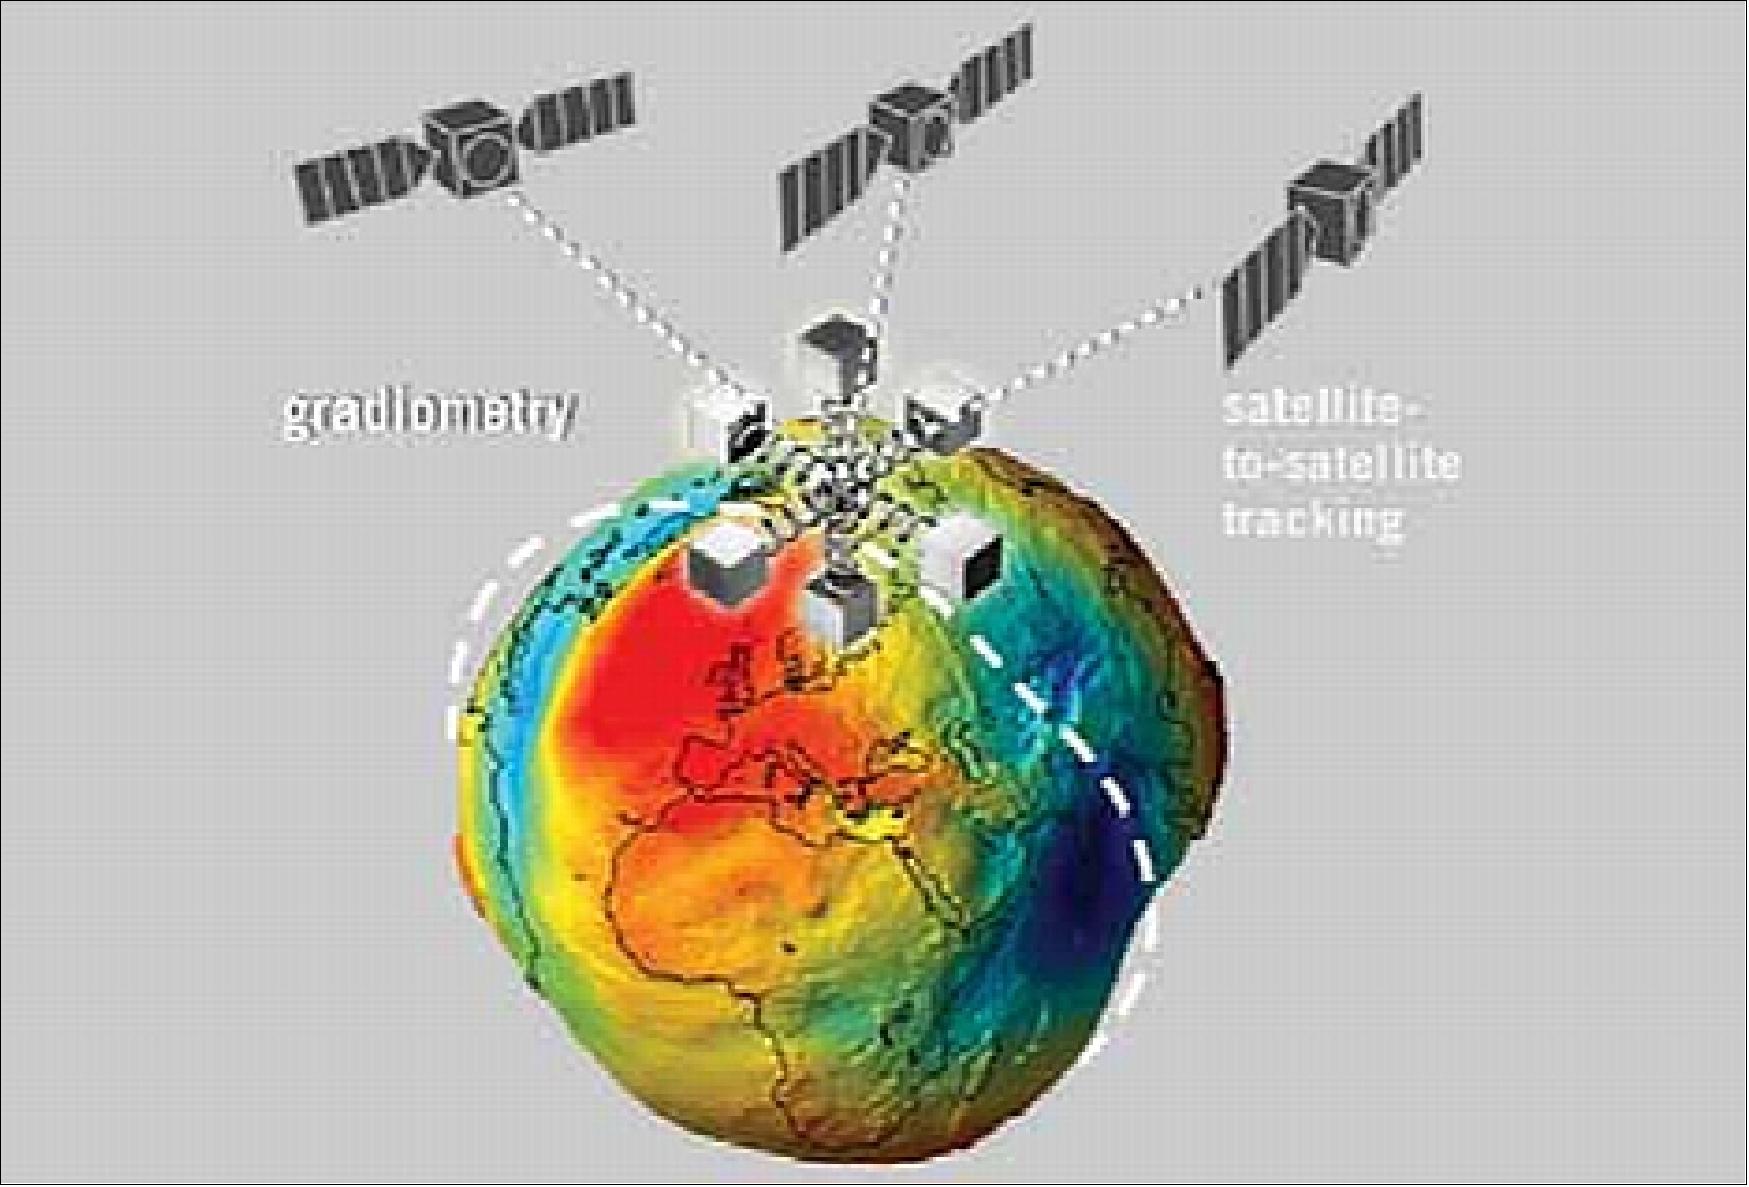 Figure 60: Artist's view of the GOCE measurement concept - illustrating the gravity gradiometer sensor measurement principle and the high-low GPS satellite positioning as the satellite circles the geoid (image credit: AOES Medialab)